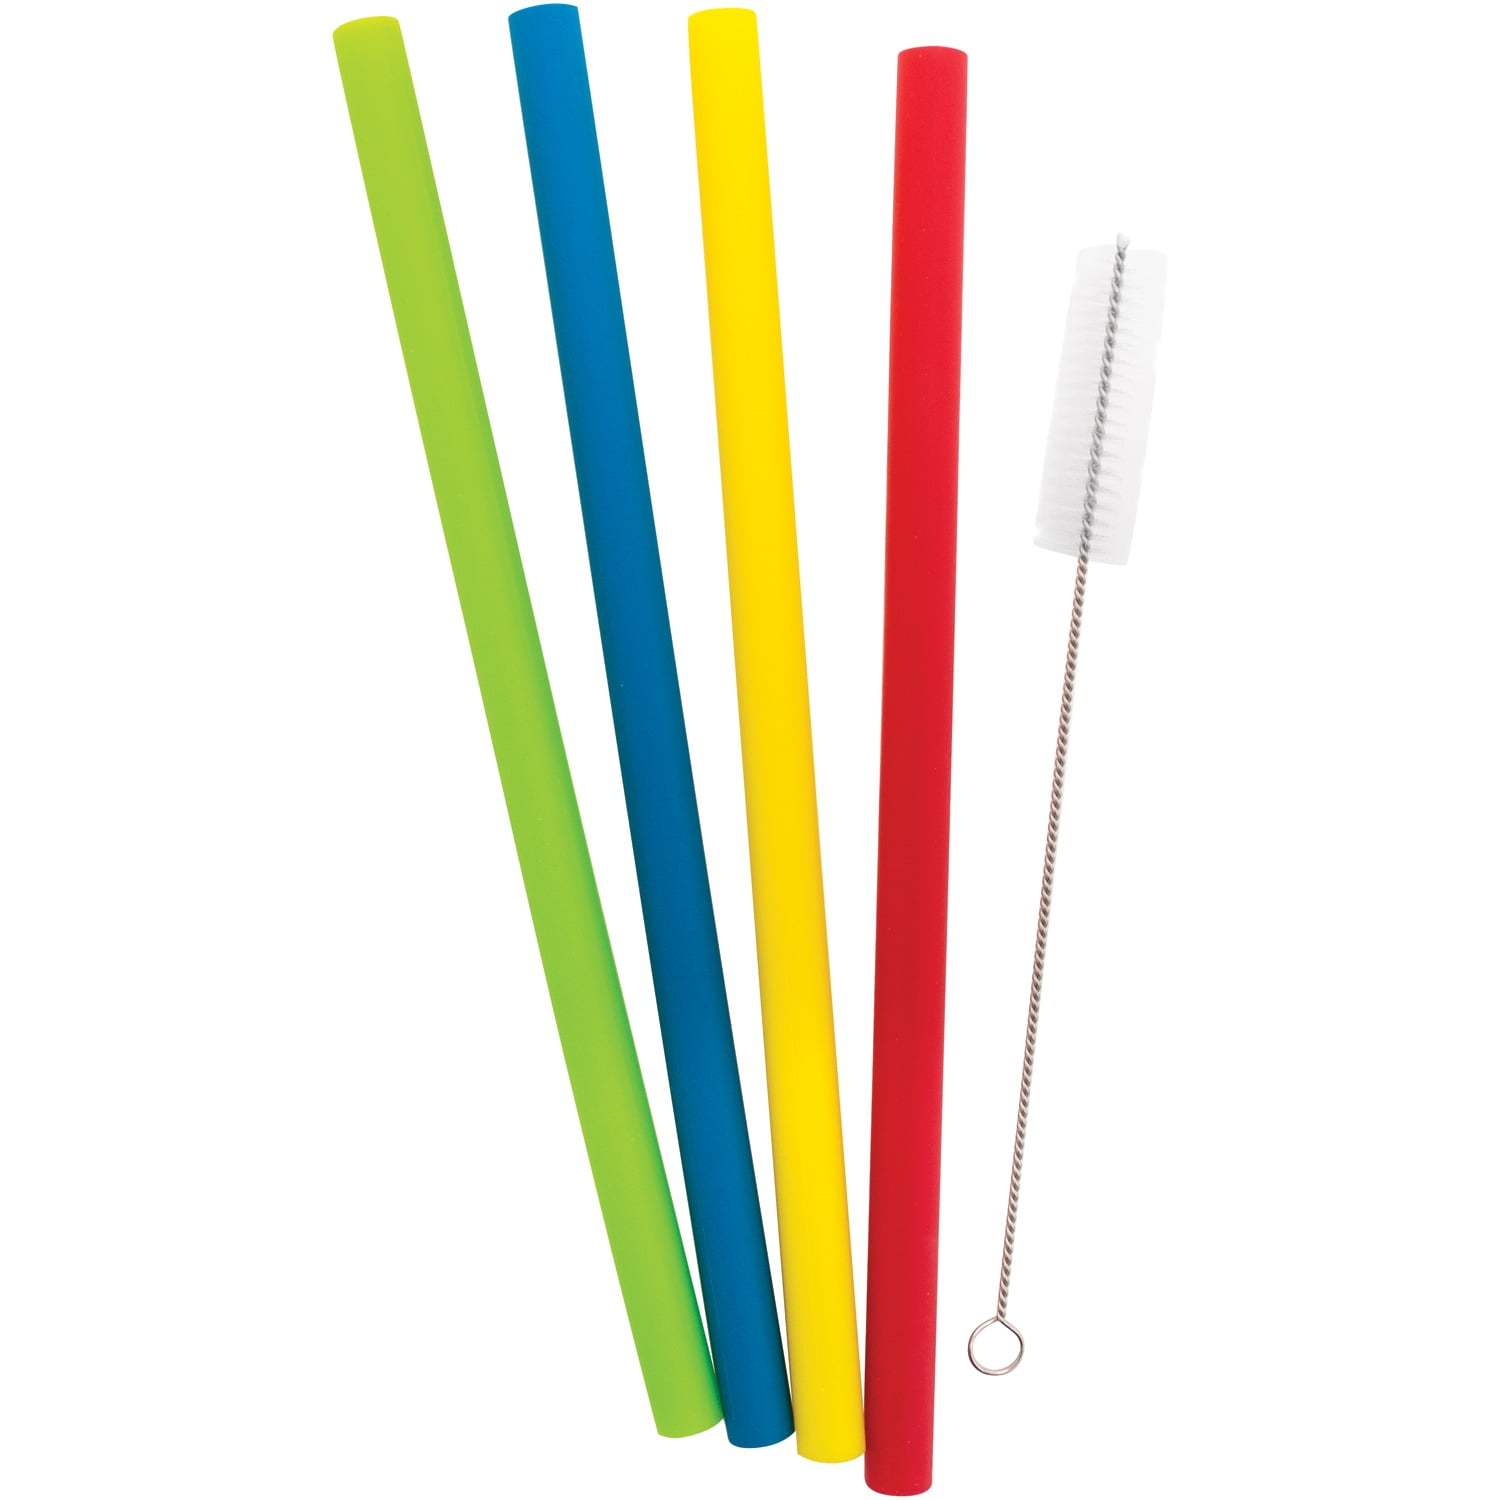 6 Inch 2 Pack Jacent Plastic Reusable Kids Straws Plus Cleaning Brush 24 Count per Pack 